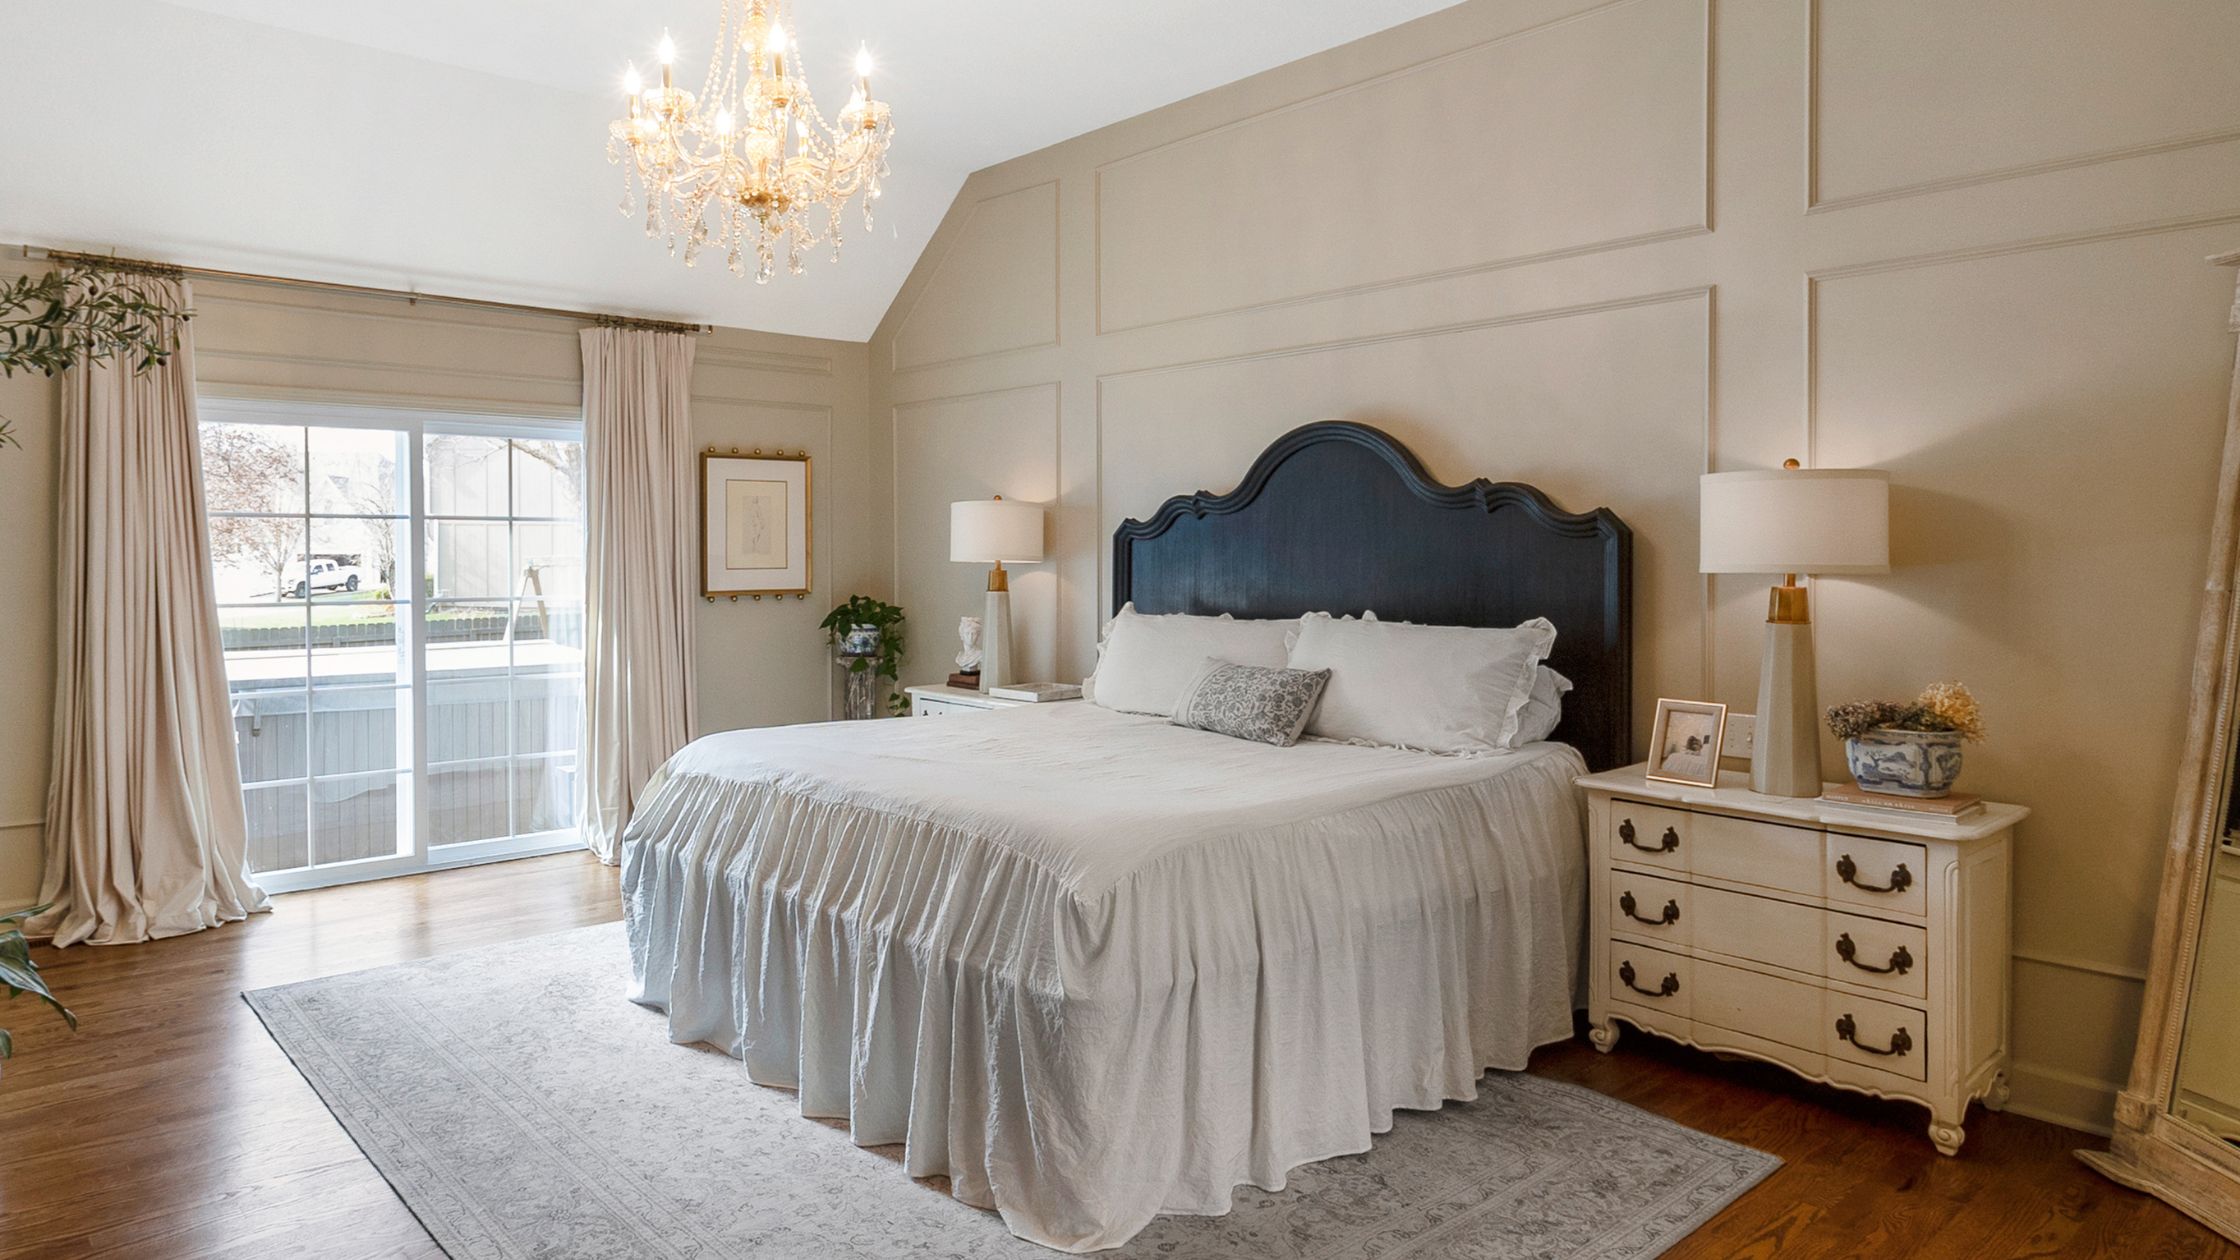 Neutral-painted bedroom with vintage-inspired decor including a chandelier, bed, two night stands and lamps.